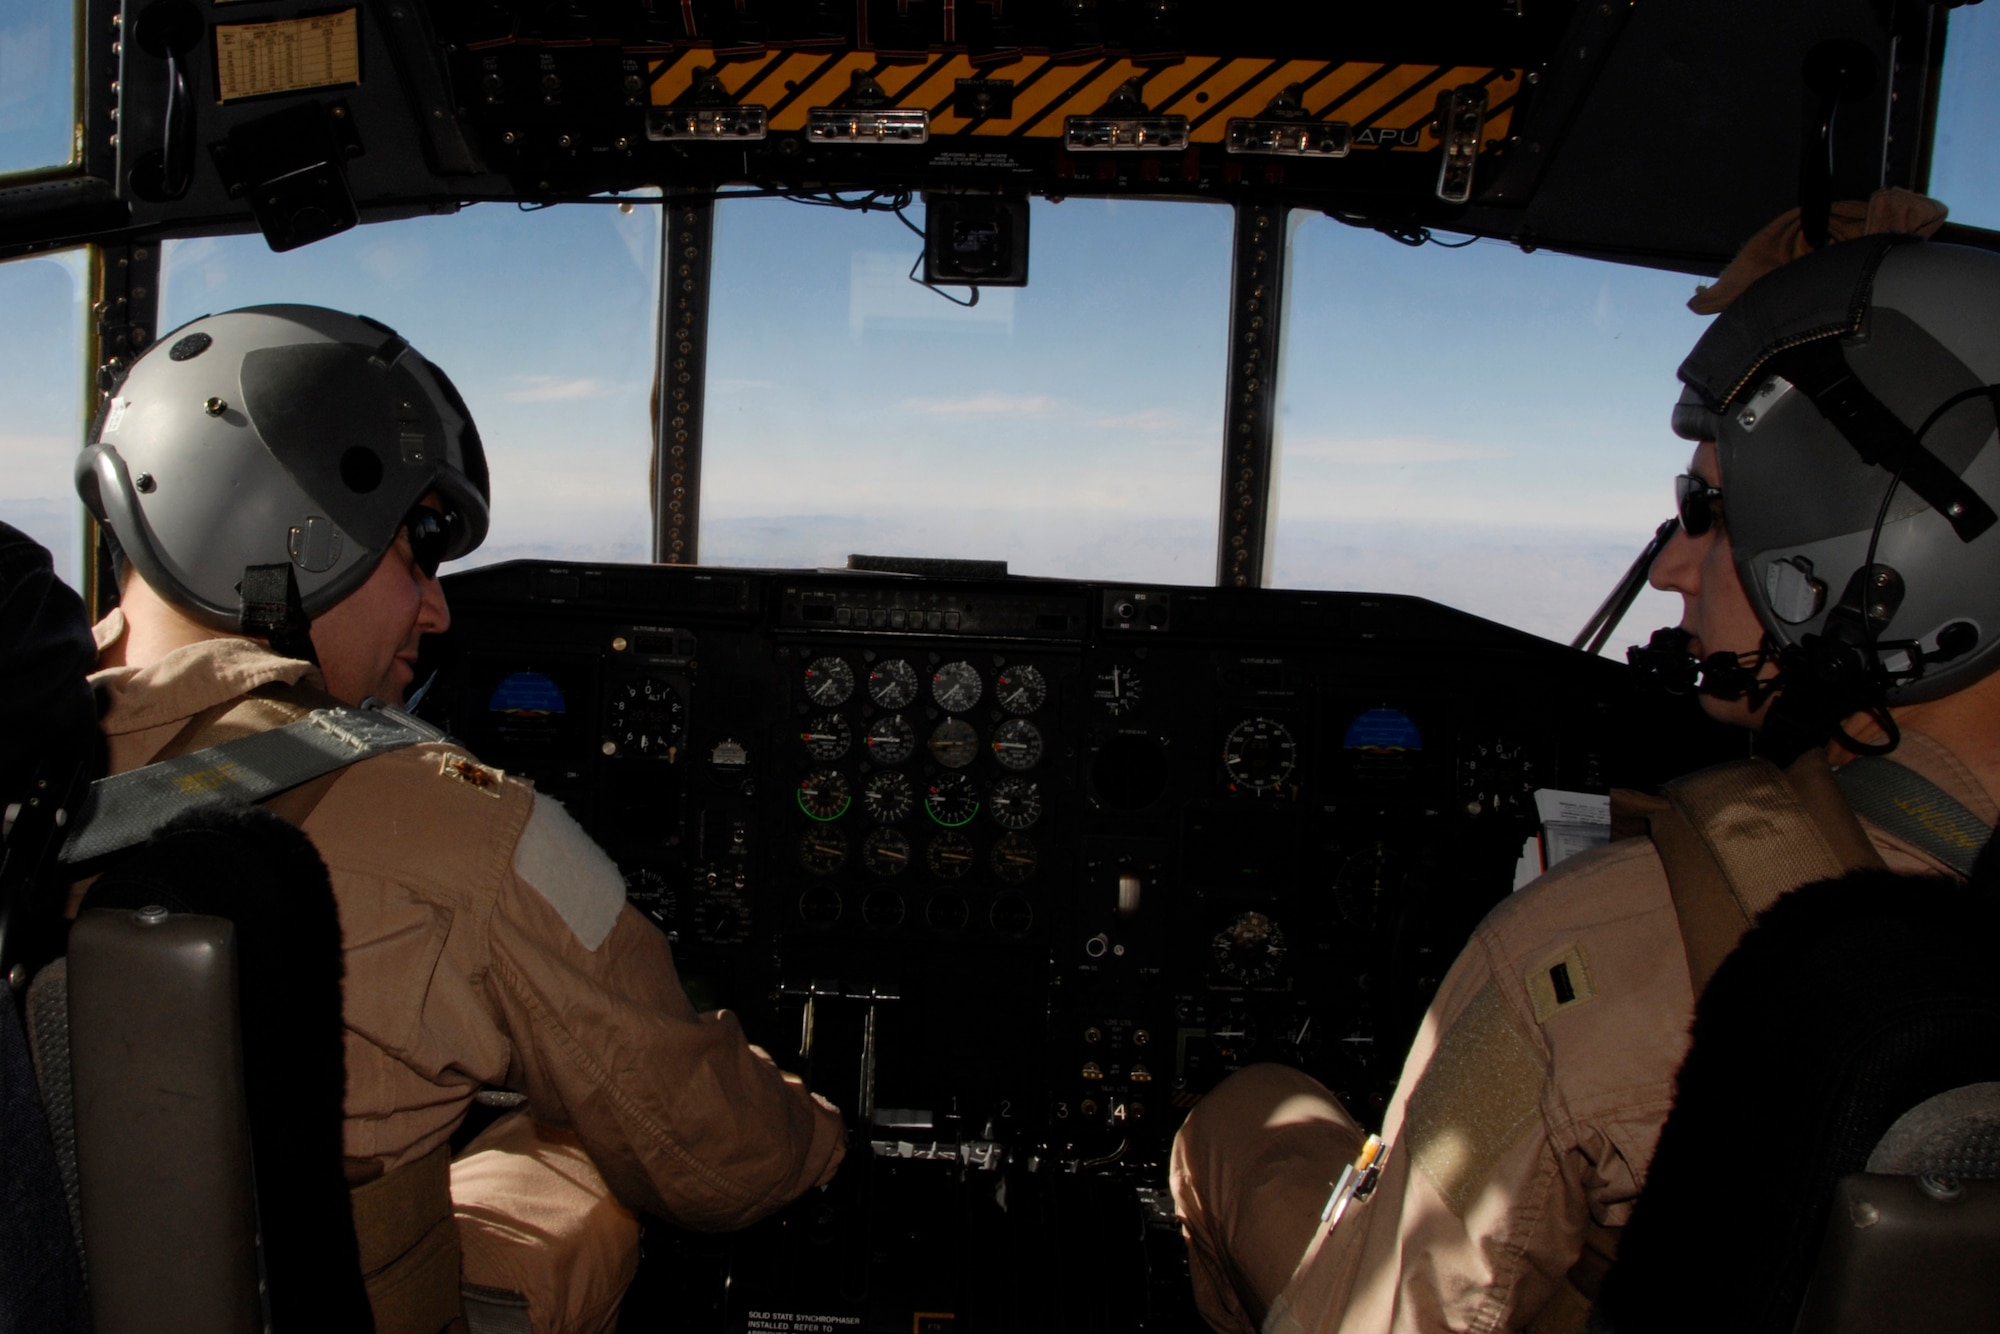 Command Pilot, Maj. Jeff Wong (left) and Co-Pilot, 1st Lt. Jason Christensen (right), with the 109th Airlift Squadron, 133rd Airlift Wing, fly a C-130 Hercules aircraft on their first mission in country to transport top U.S. Army and Afghan military leaders from a military airbase in Herat, Afghanistan to Kabul on Monday, Dec. 1, 2008.